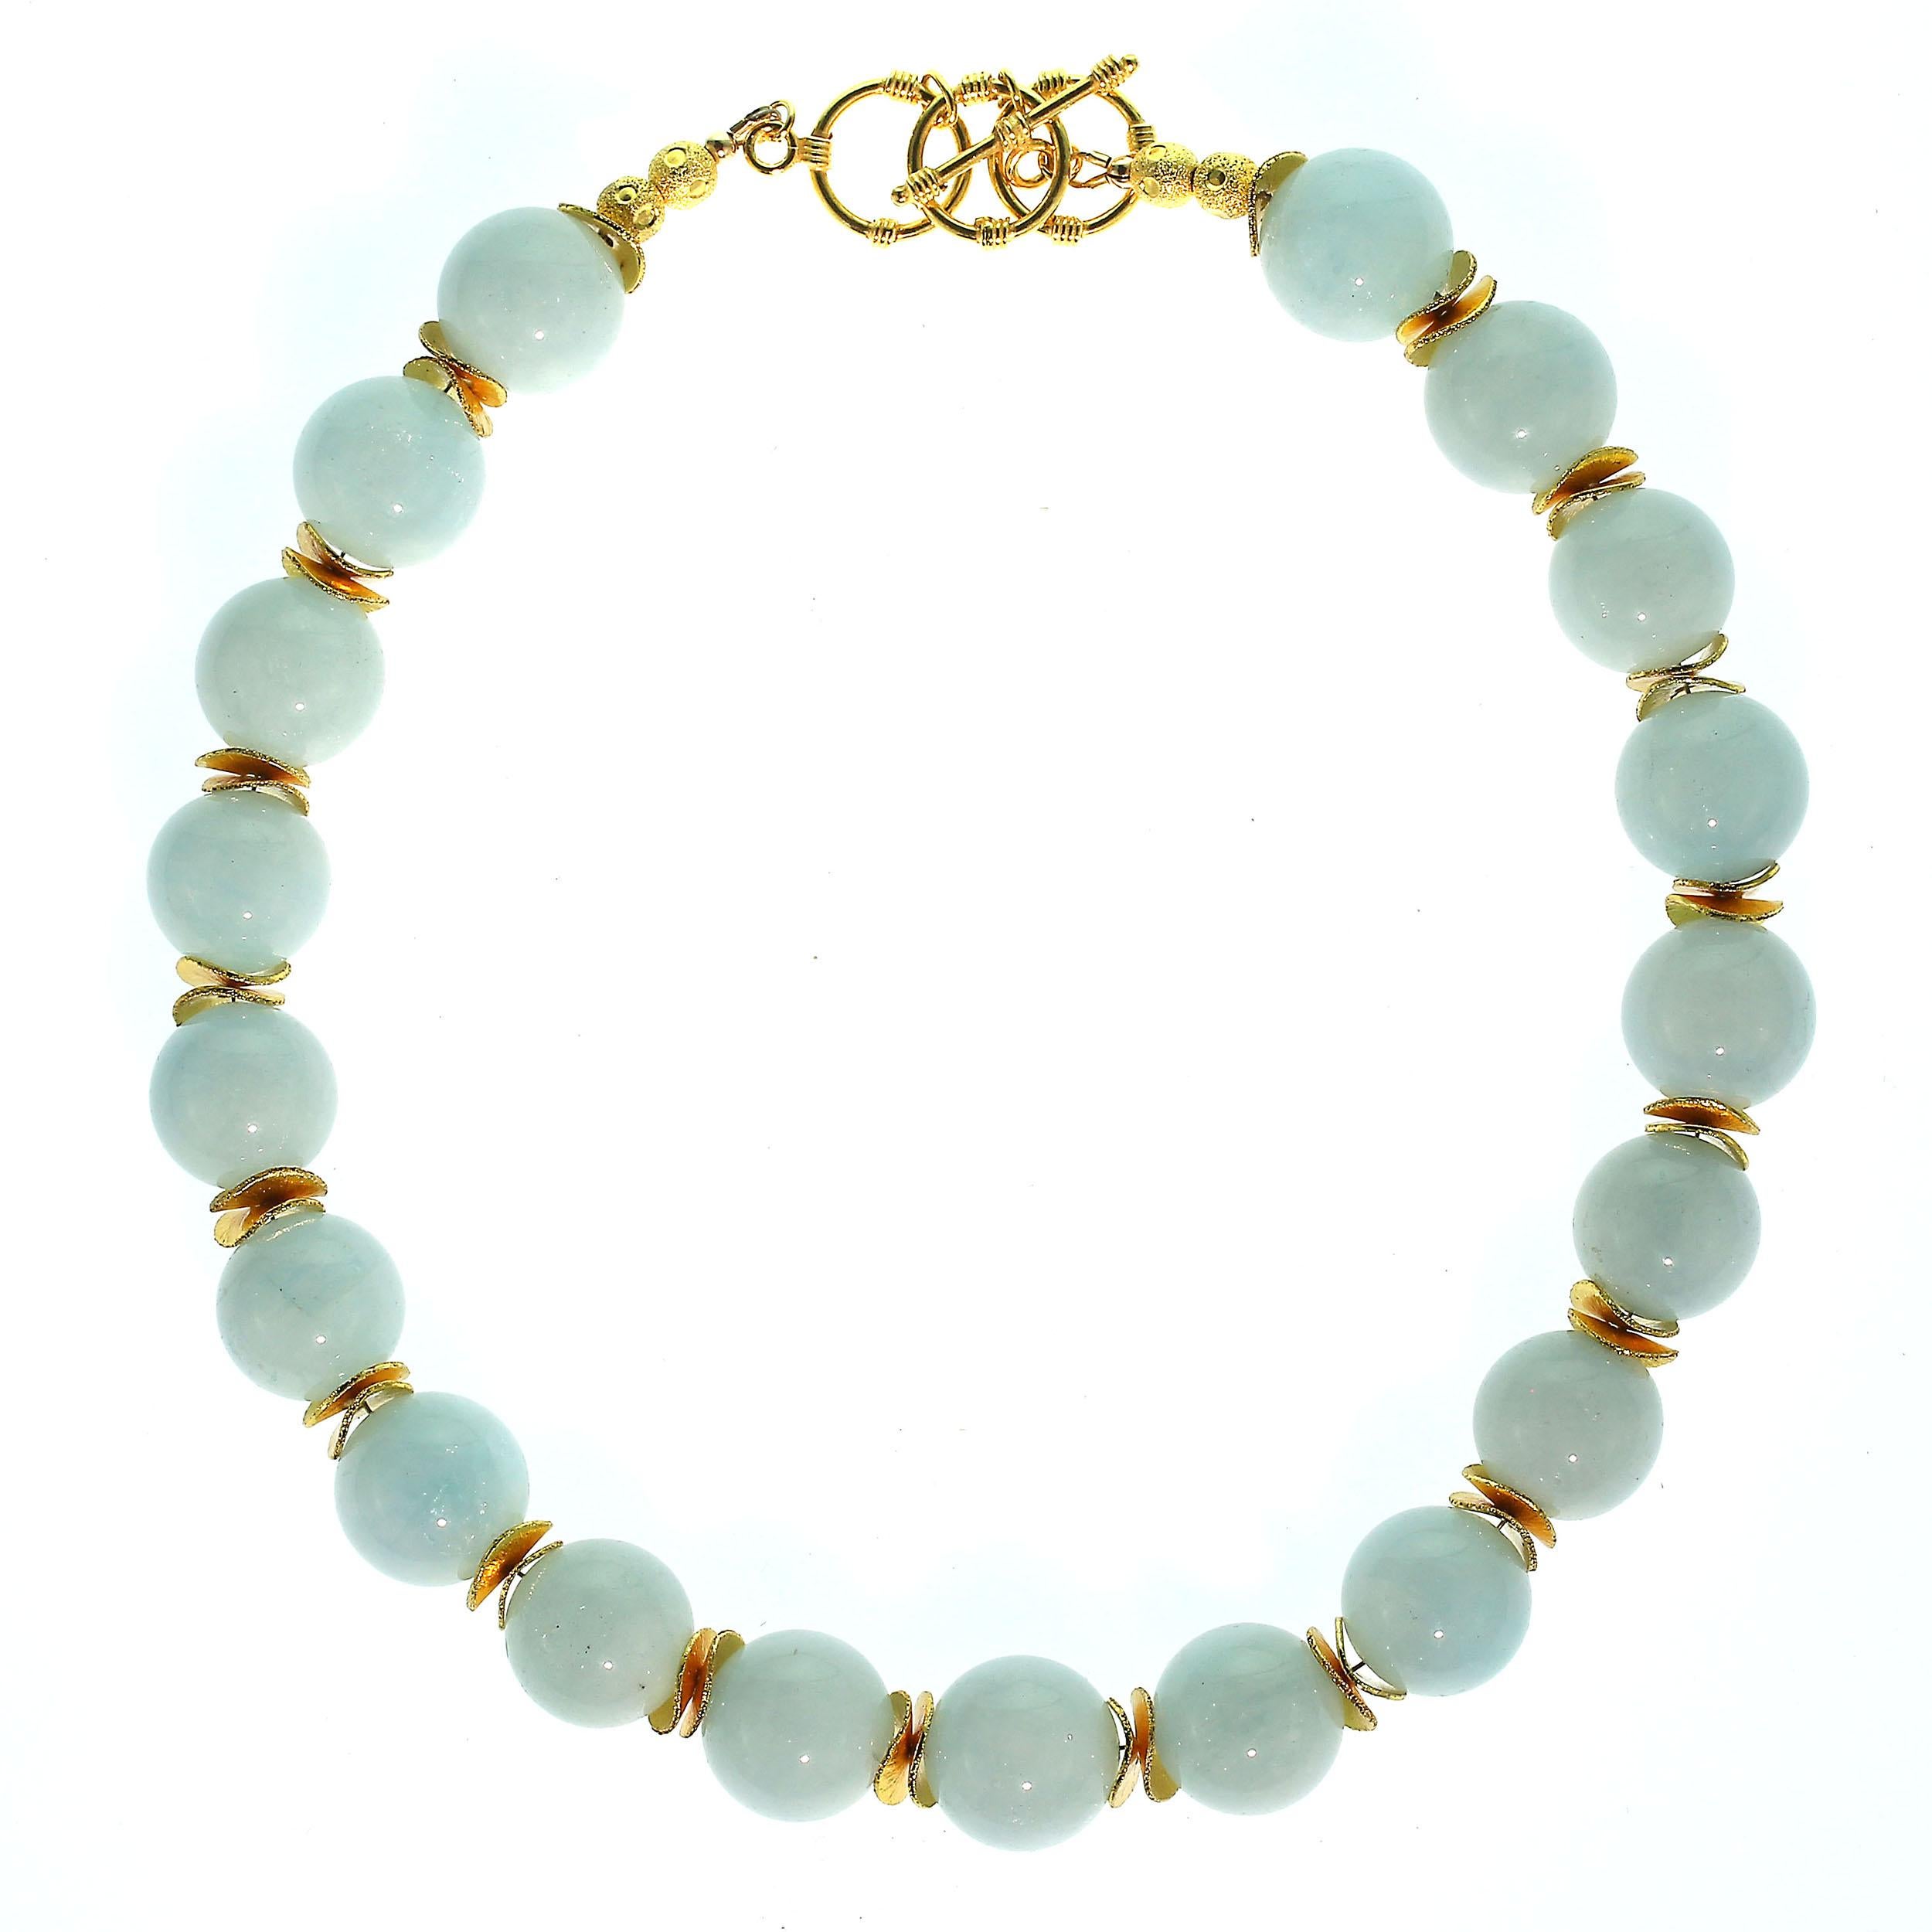 Women's or Men's AJD Statement Aquamarine Choker with Goldy Accents March Birthstone